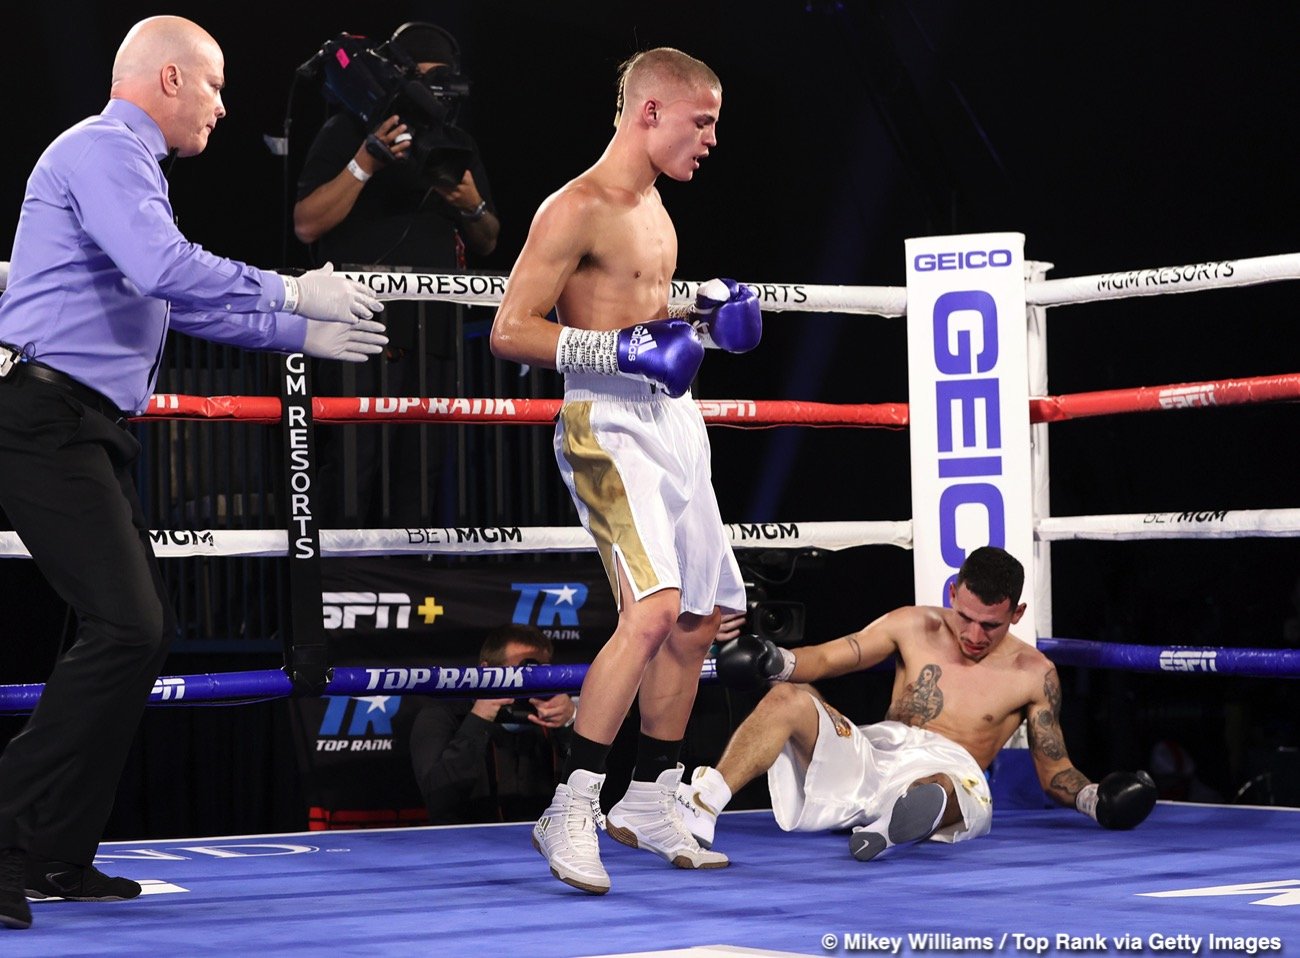 Image: Results / Photos: Bud Crawford KOs Brook in 4, Franco-Moloney 2 ends in controversey